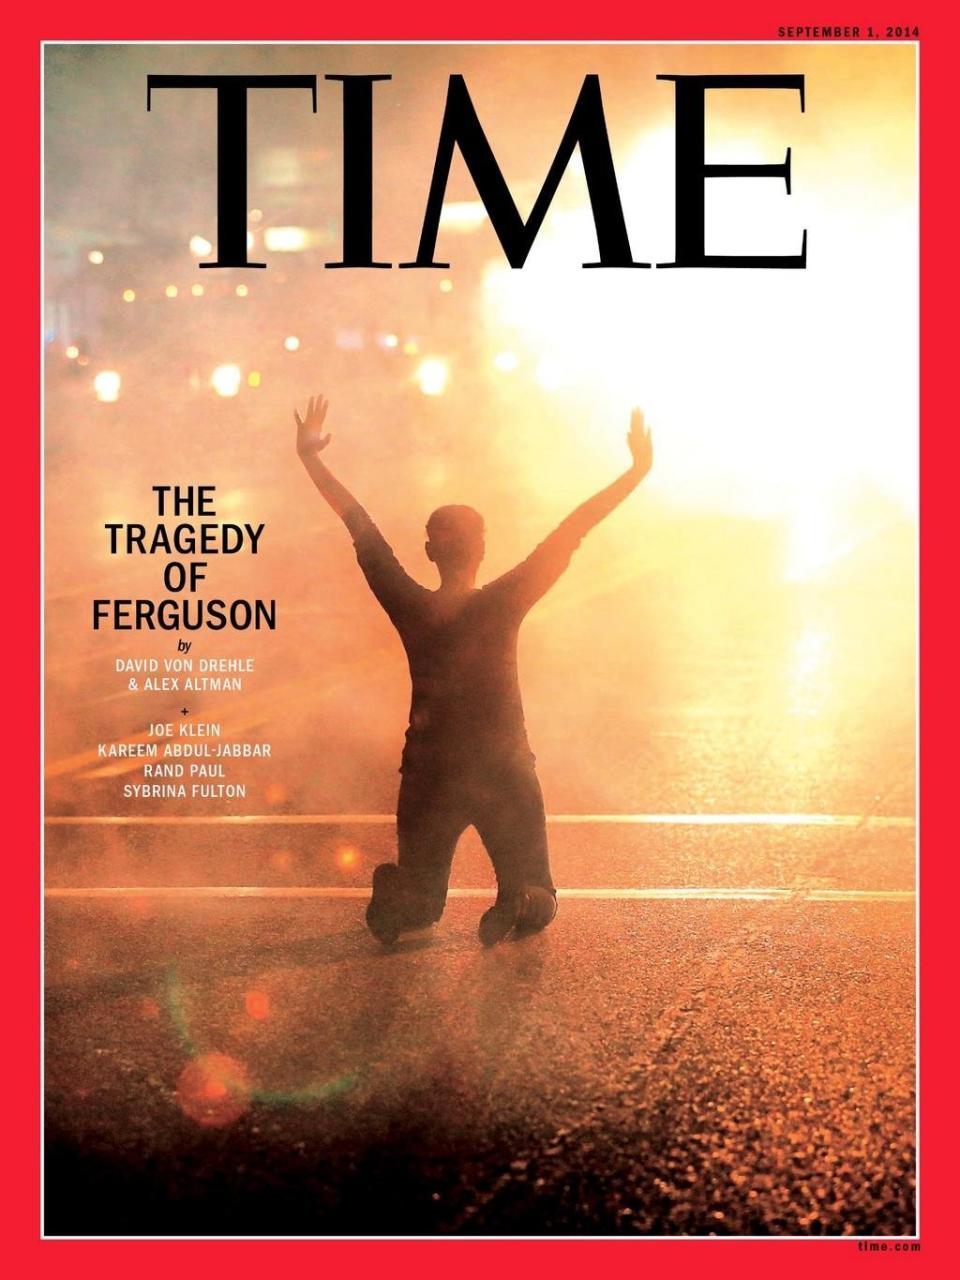 Time's design director D.W. Pine says that the cover not only represents a moment in time, but also a collective mood or feeling.  "People look to us for that guidance," he says. "With Ferguson, we chose to present it with a piece of photojournalism. Then people look at it and they say, 'Okay, this is what Time considers to be important.'"